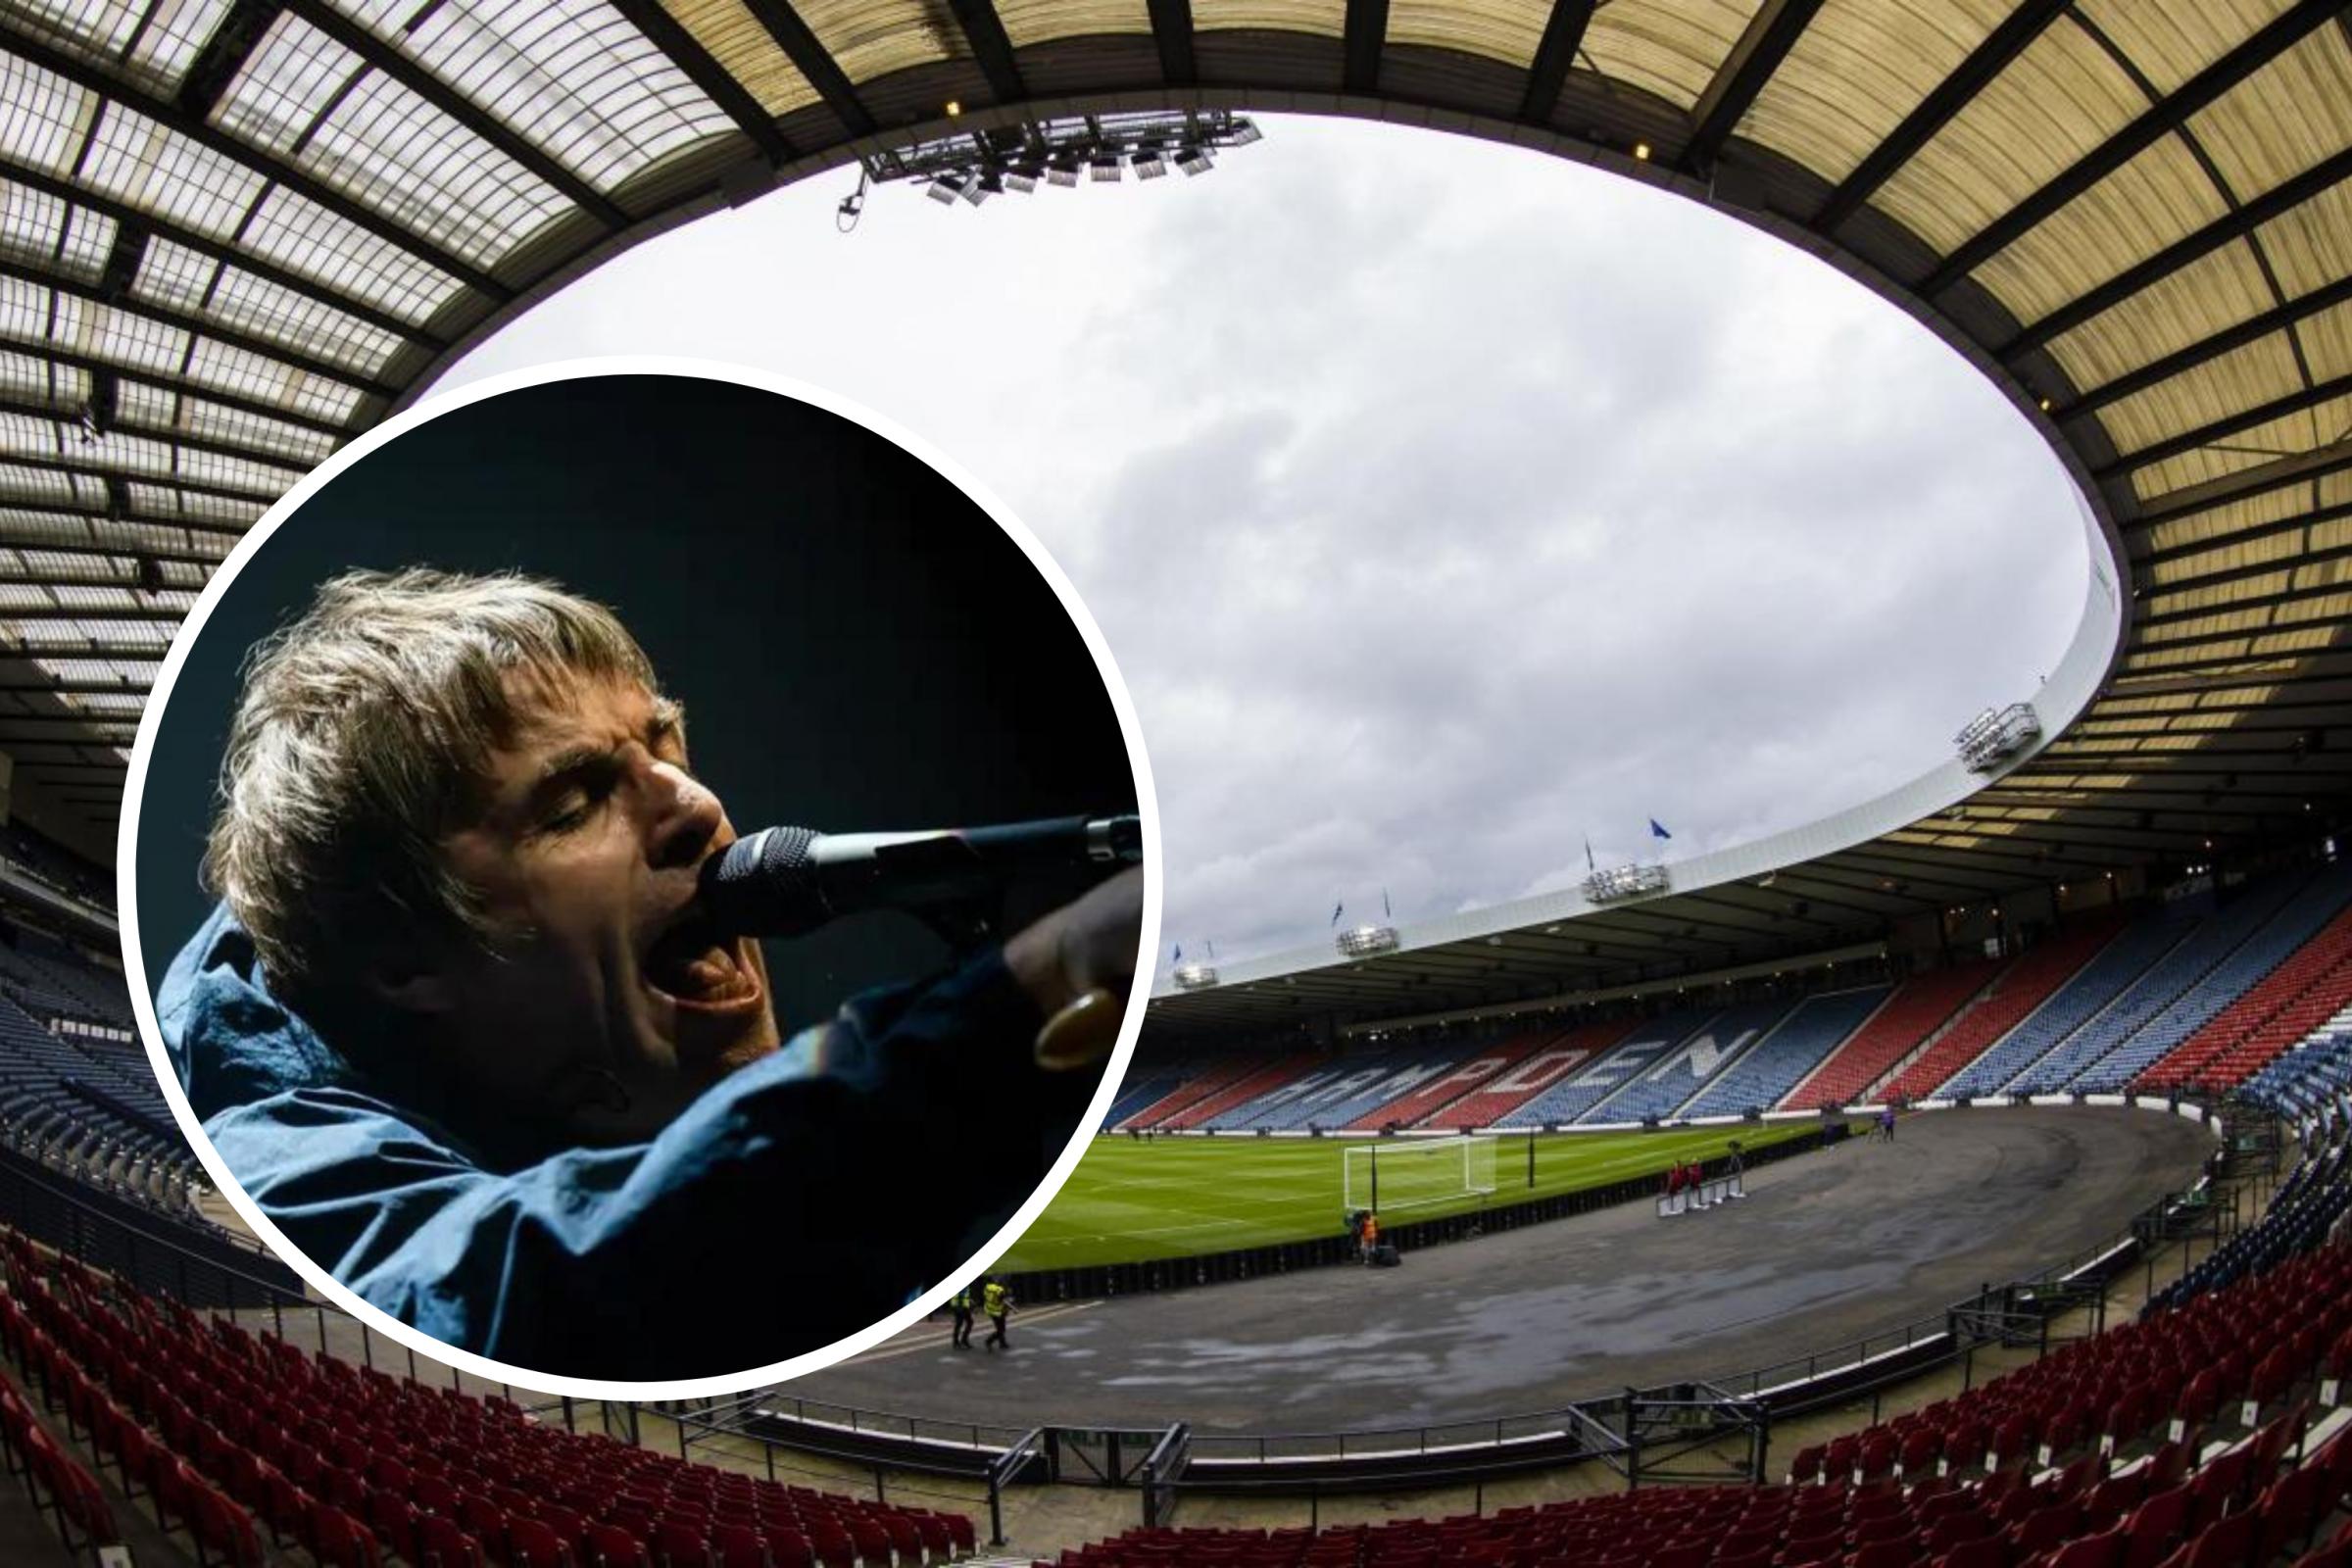 List of items banned from Liam Gallagher's gig in Glasgow's Hampden Park